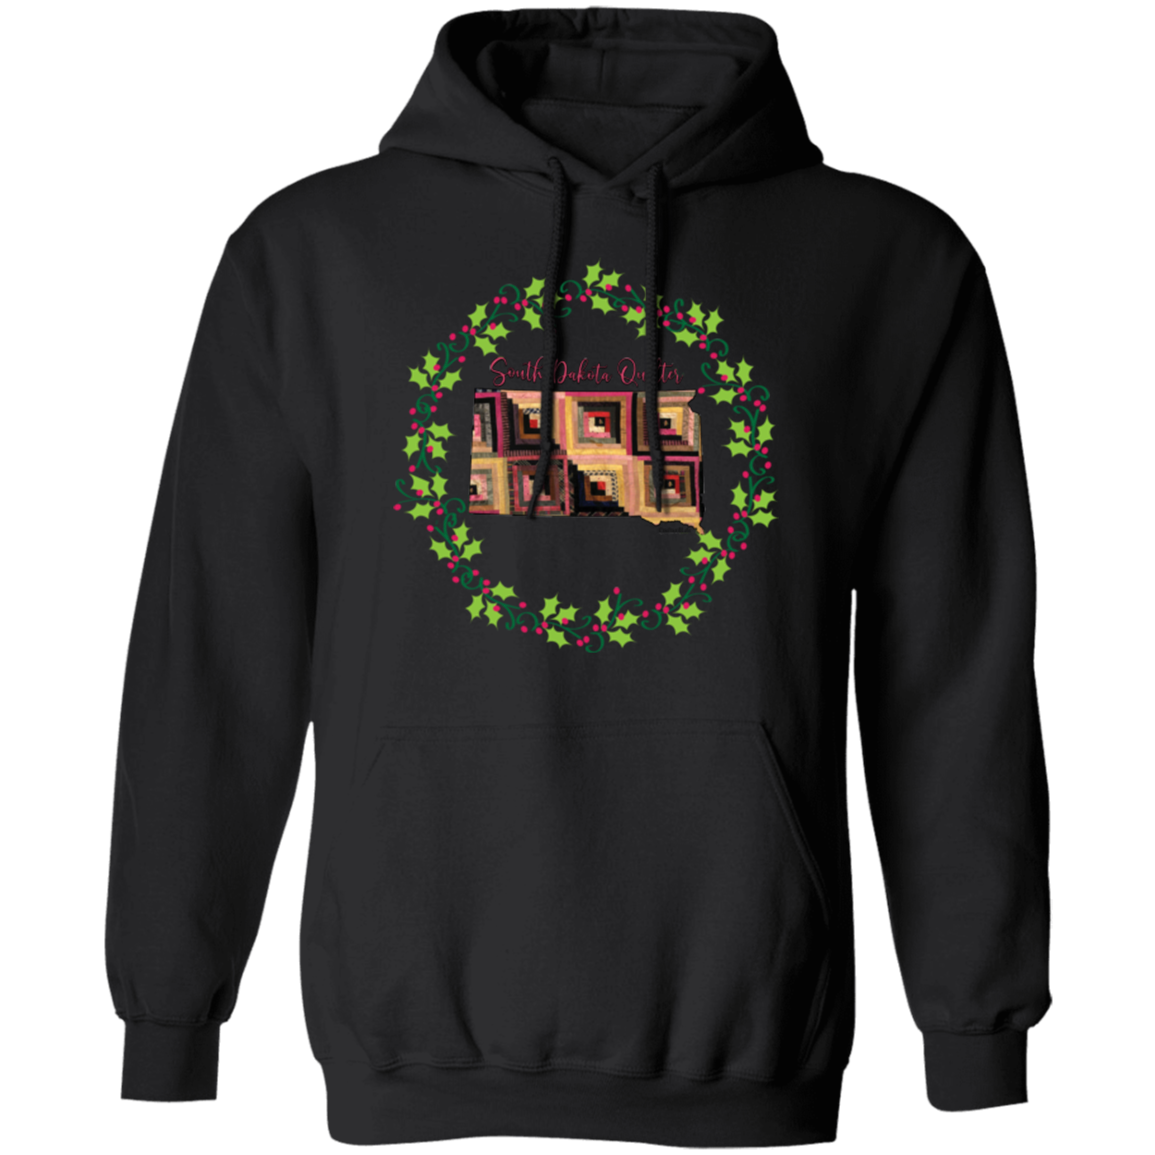 South Dakota Quilter Christmas Pullover Hoodie